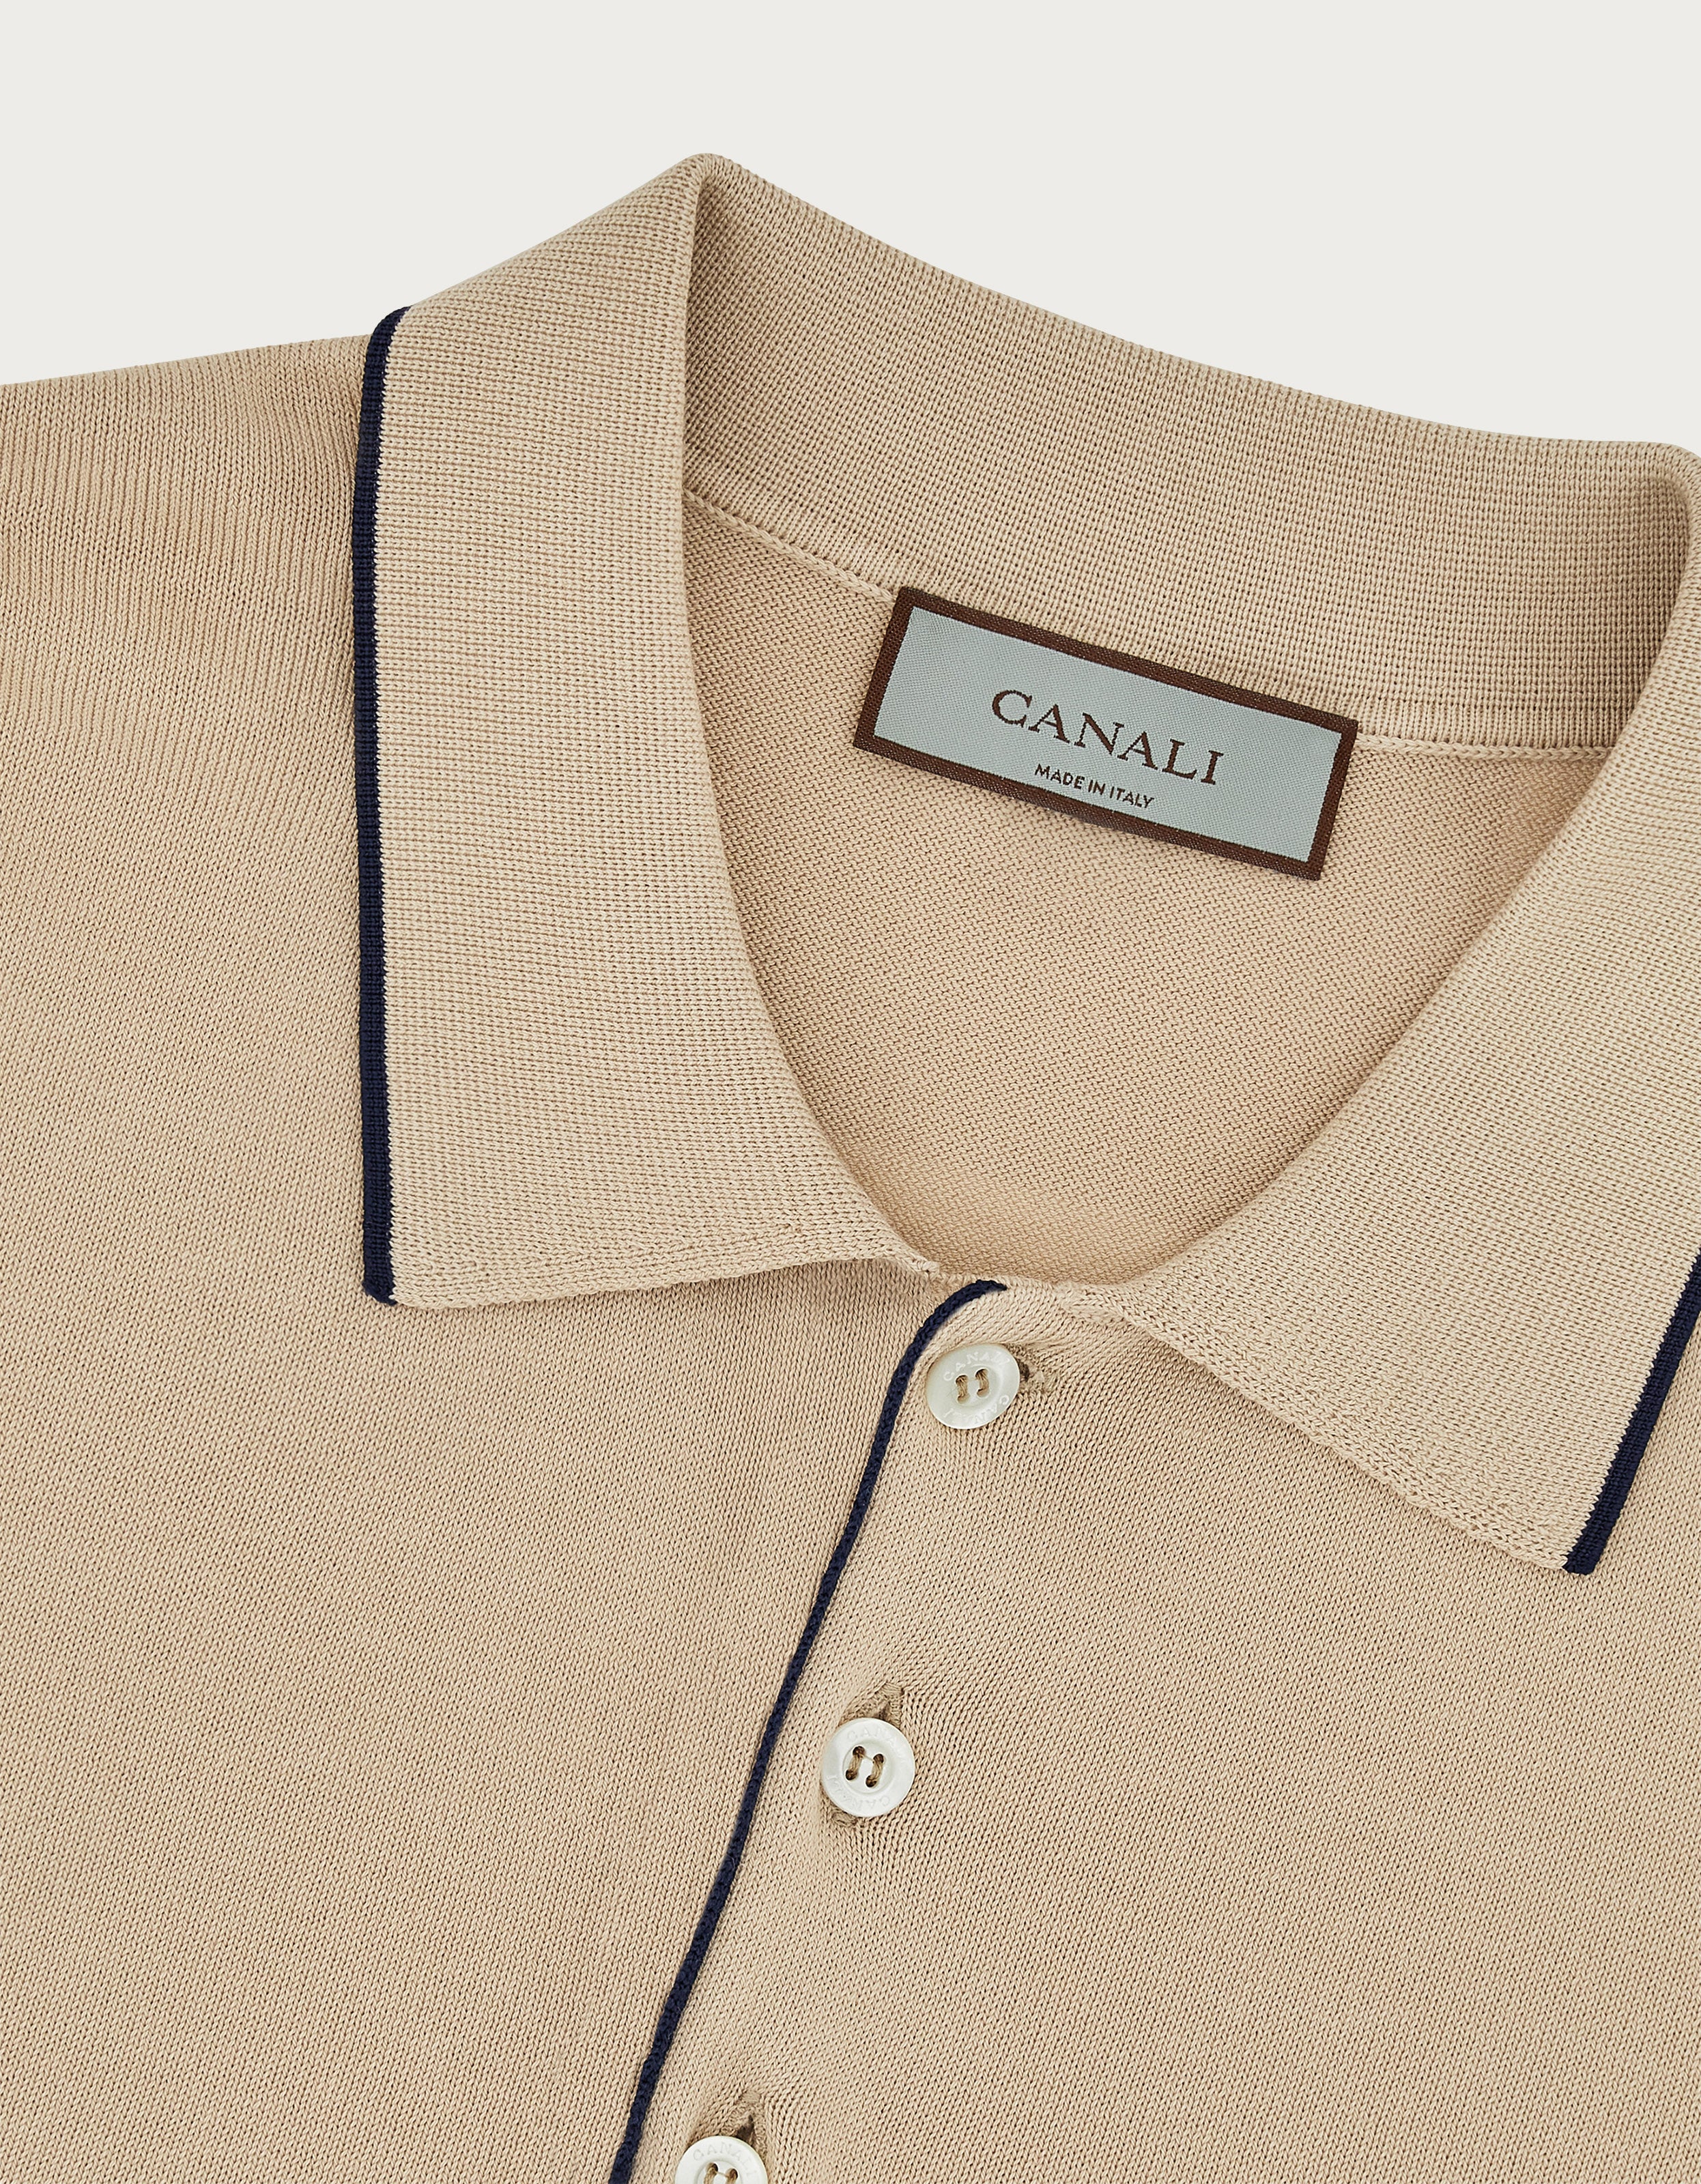 CANALI - Beige and Navy Knitted Shaved Cotton Polo Shirt C0997-MK01148-708